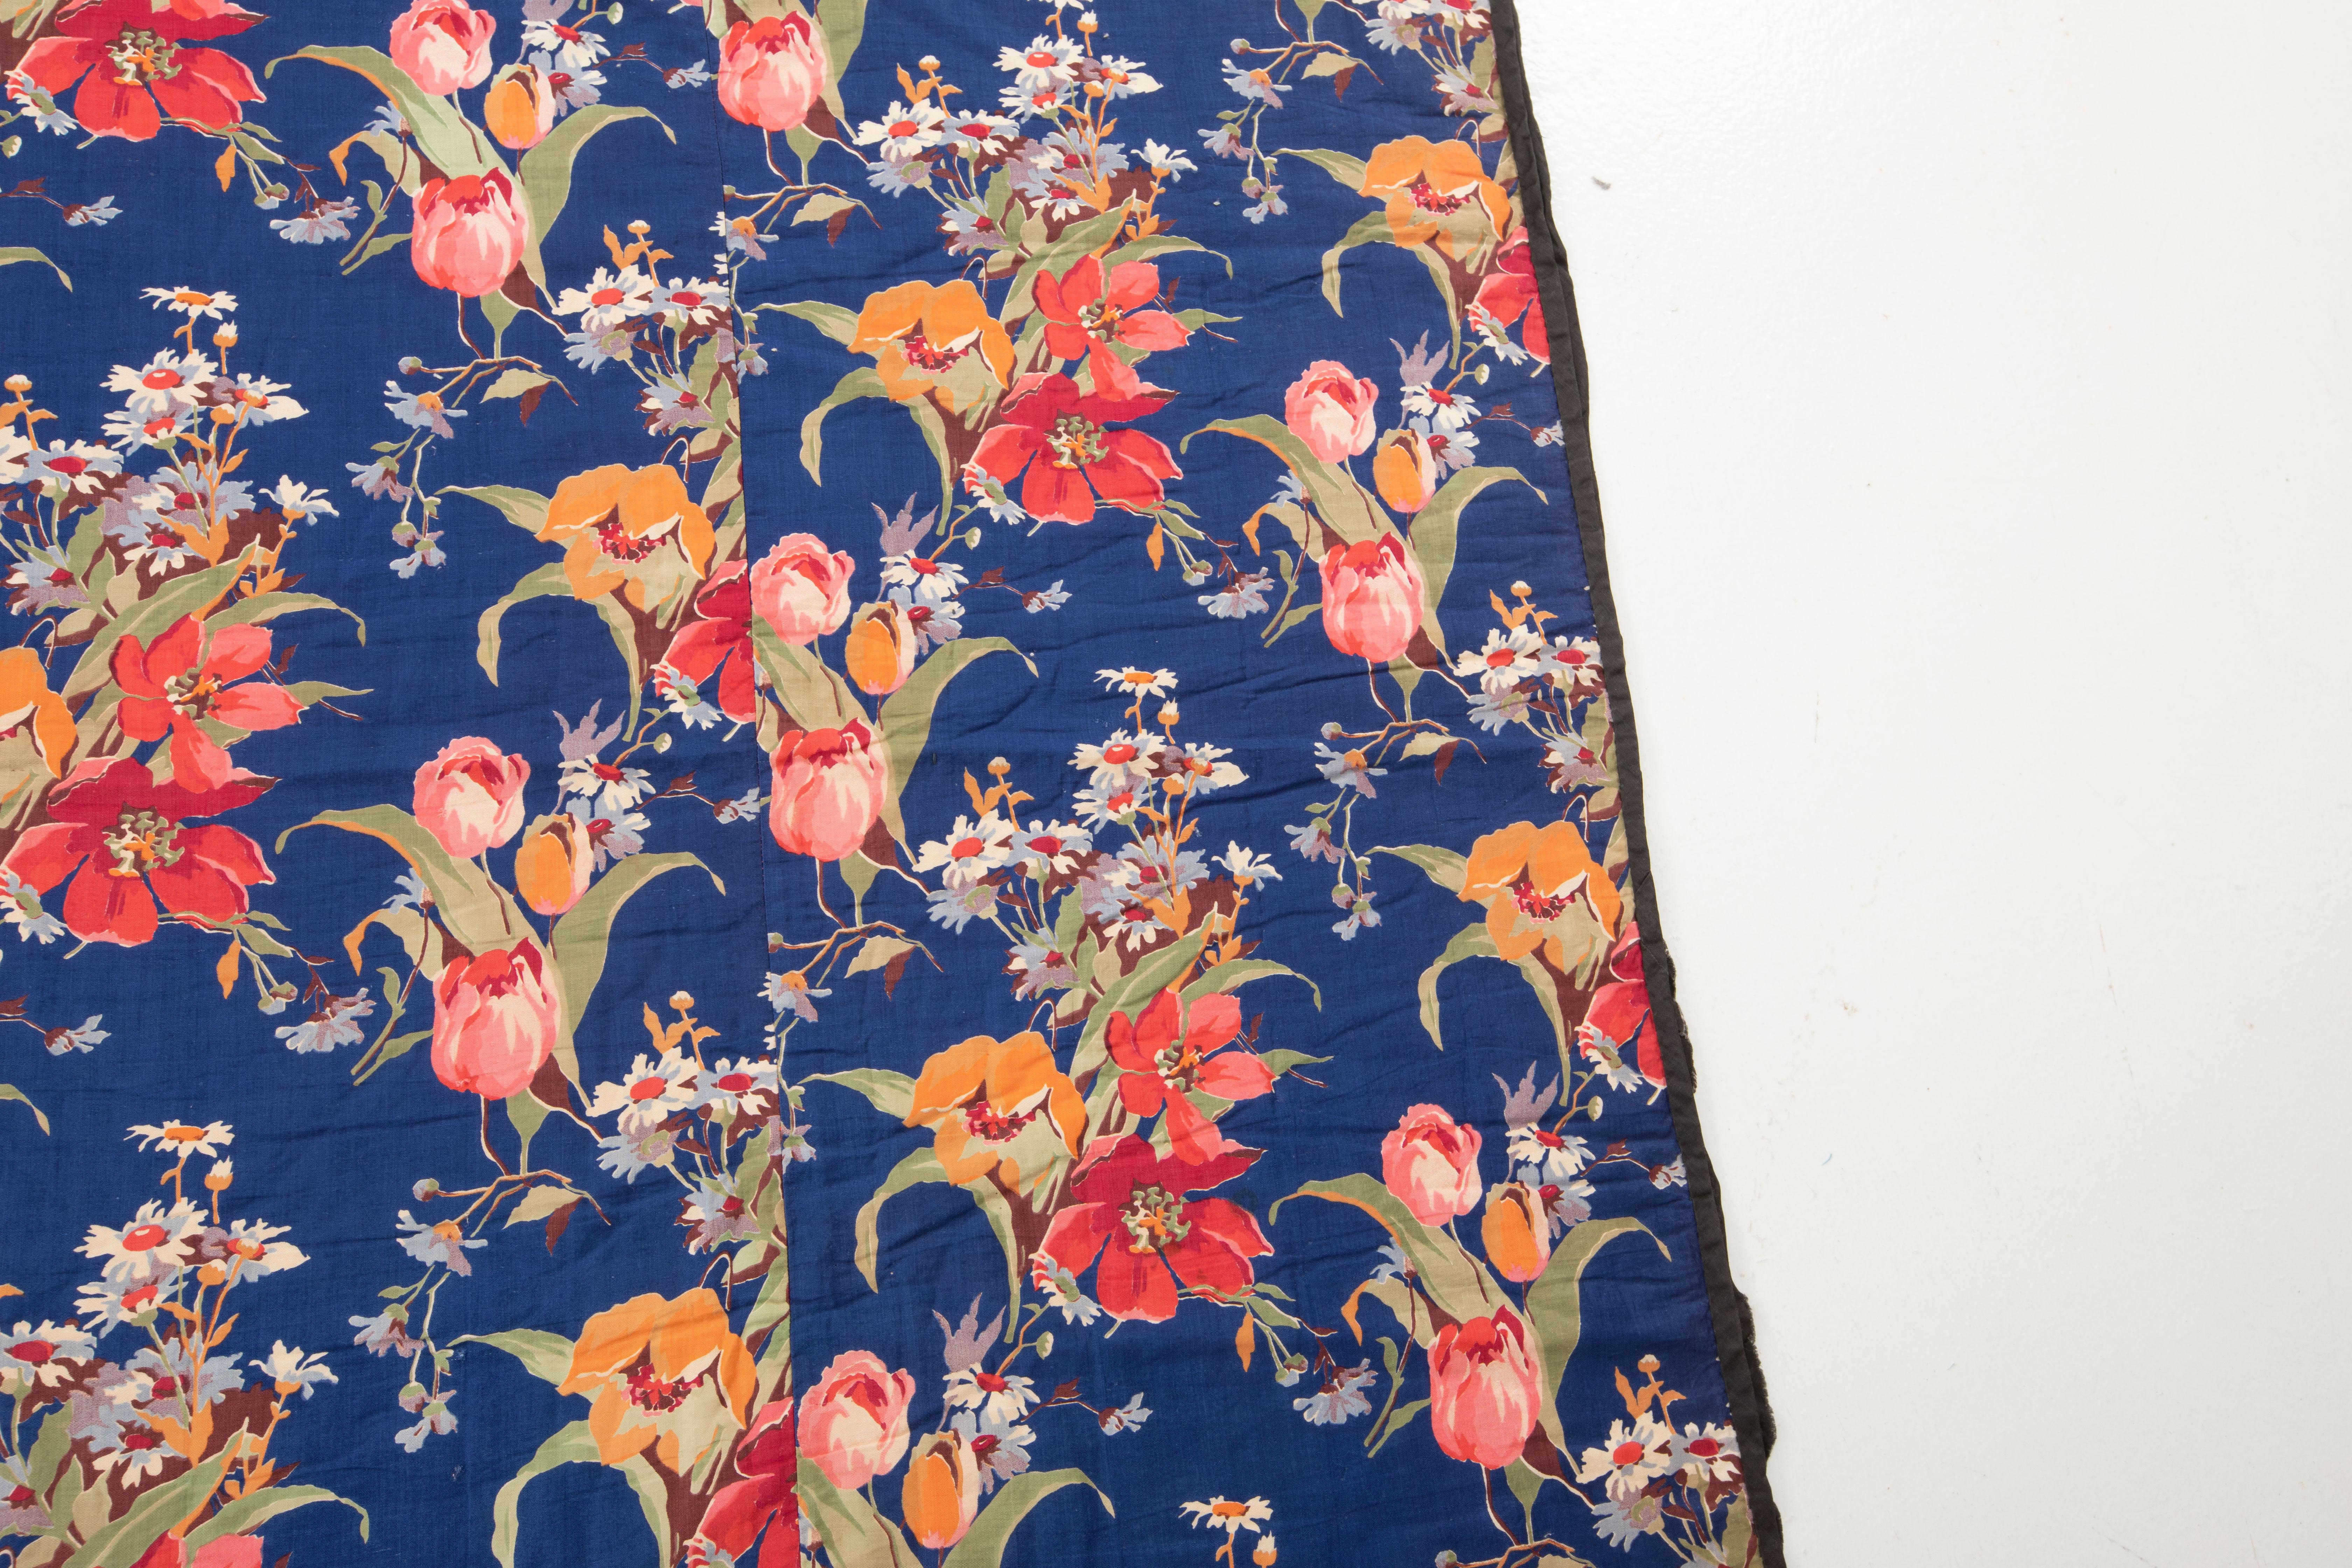 Russian Roller Printed Cotton Fabric Panel, Mid-20th Century or Earlier For Sale 3